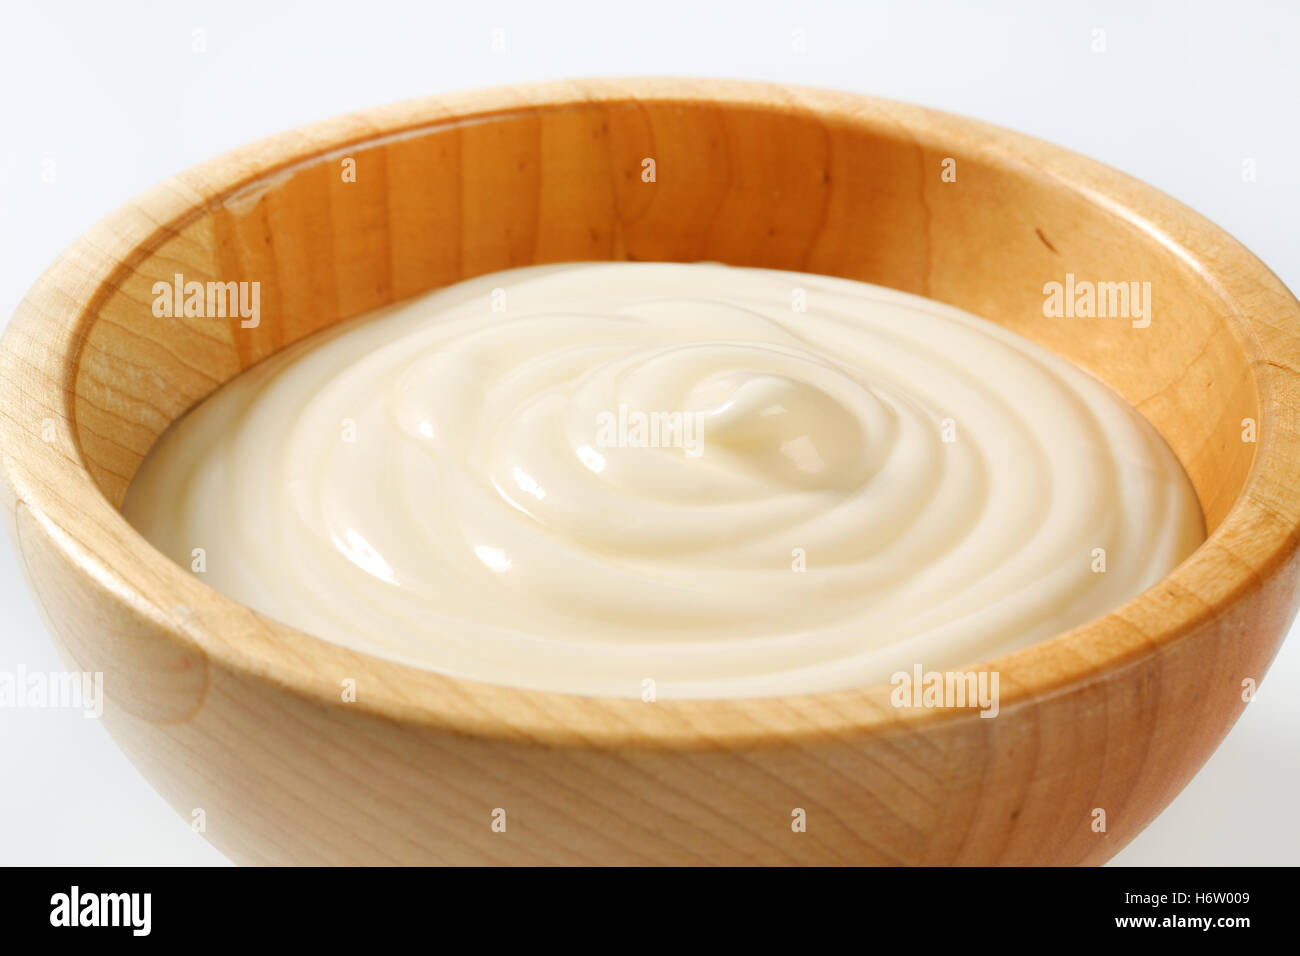 food aliment spread sauce cream plain dressing dish meal smooth wooden dairy milk product organic salad dressing ingredient Stock Photo